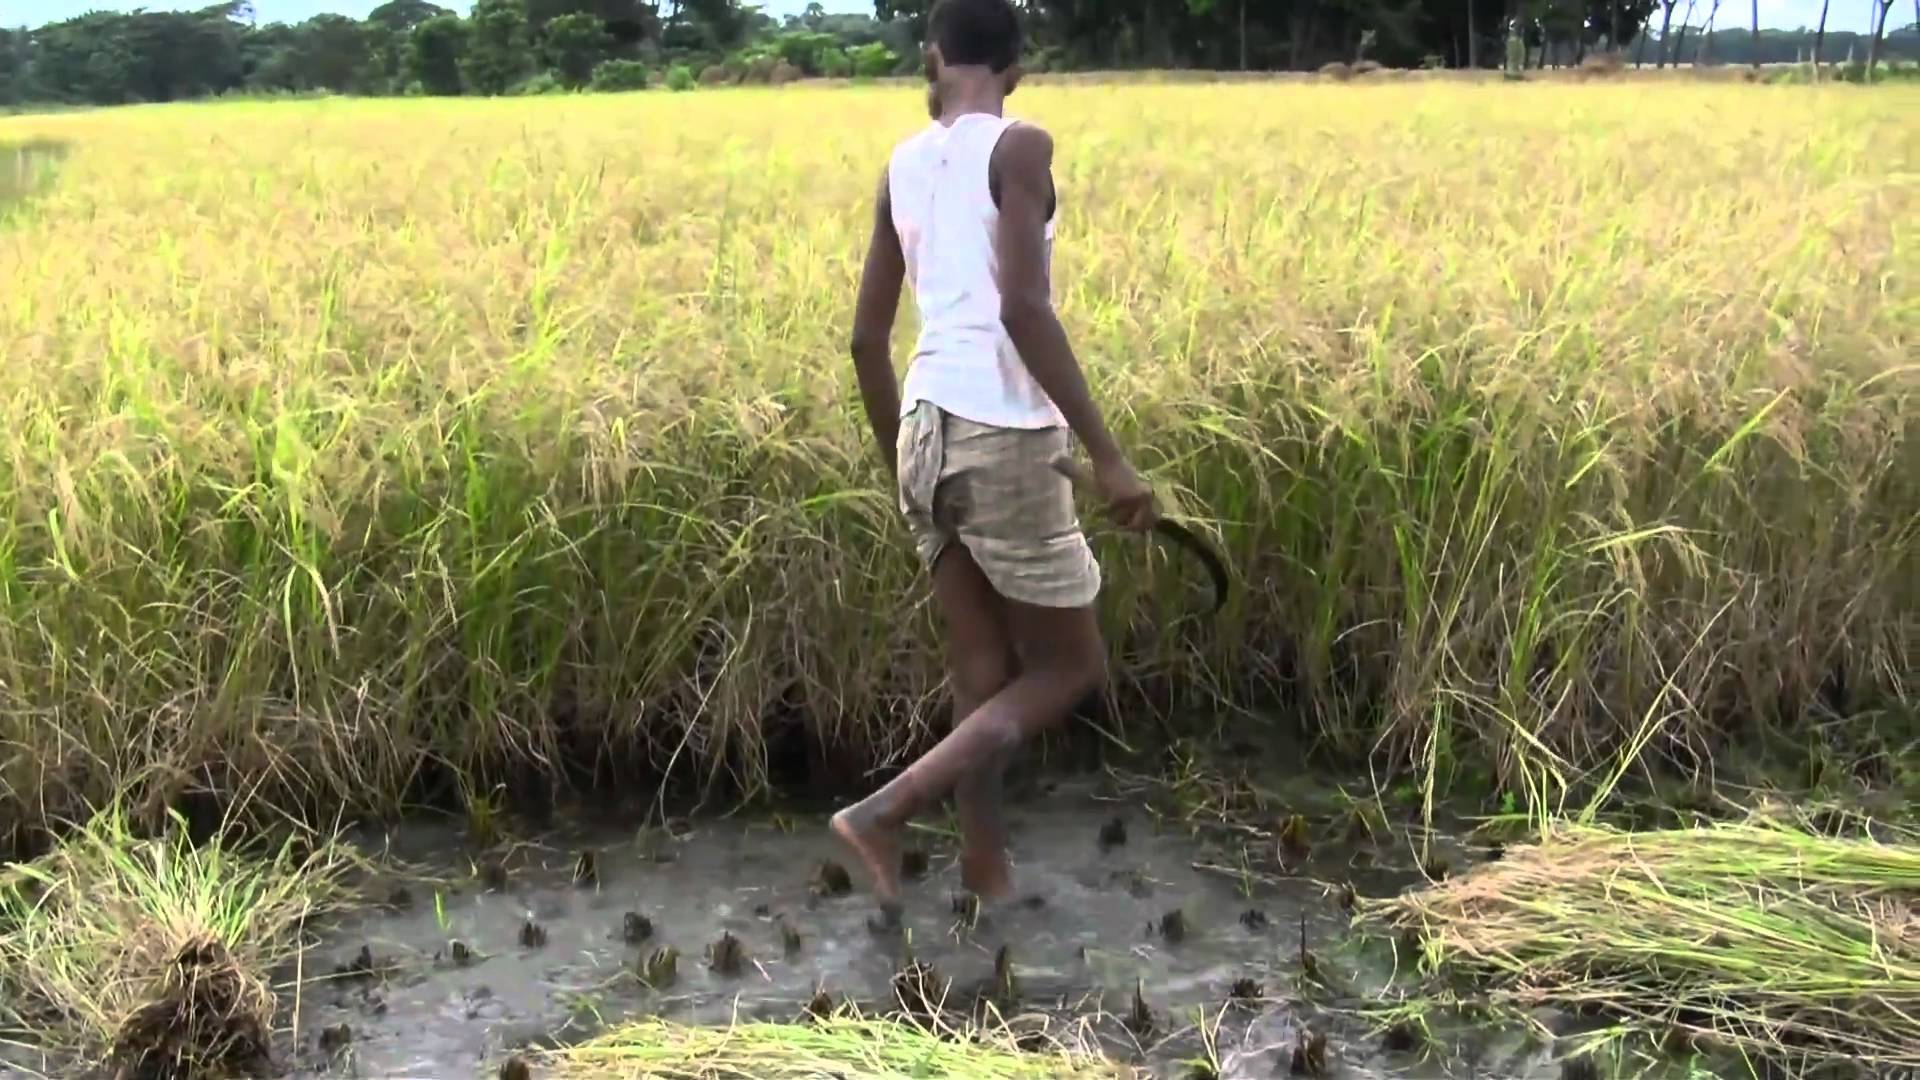 Farmers cut rice plants in the field of Bangladesh - YouTube